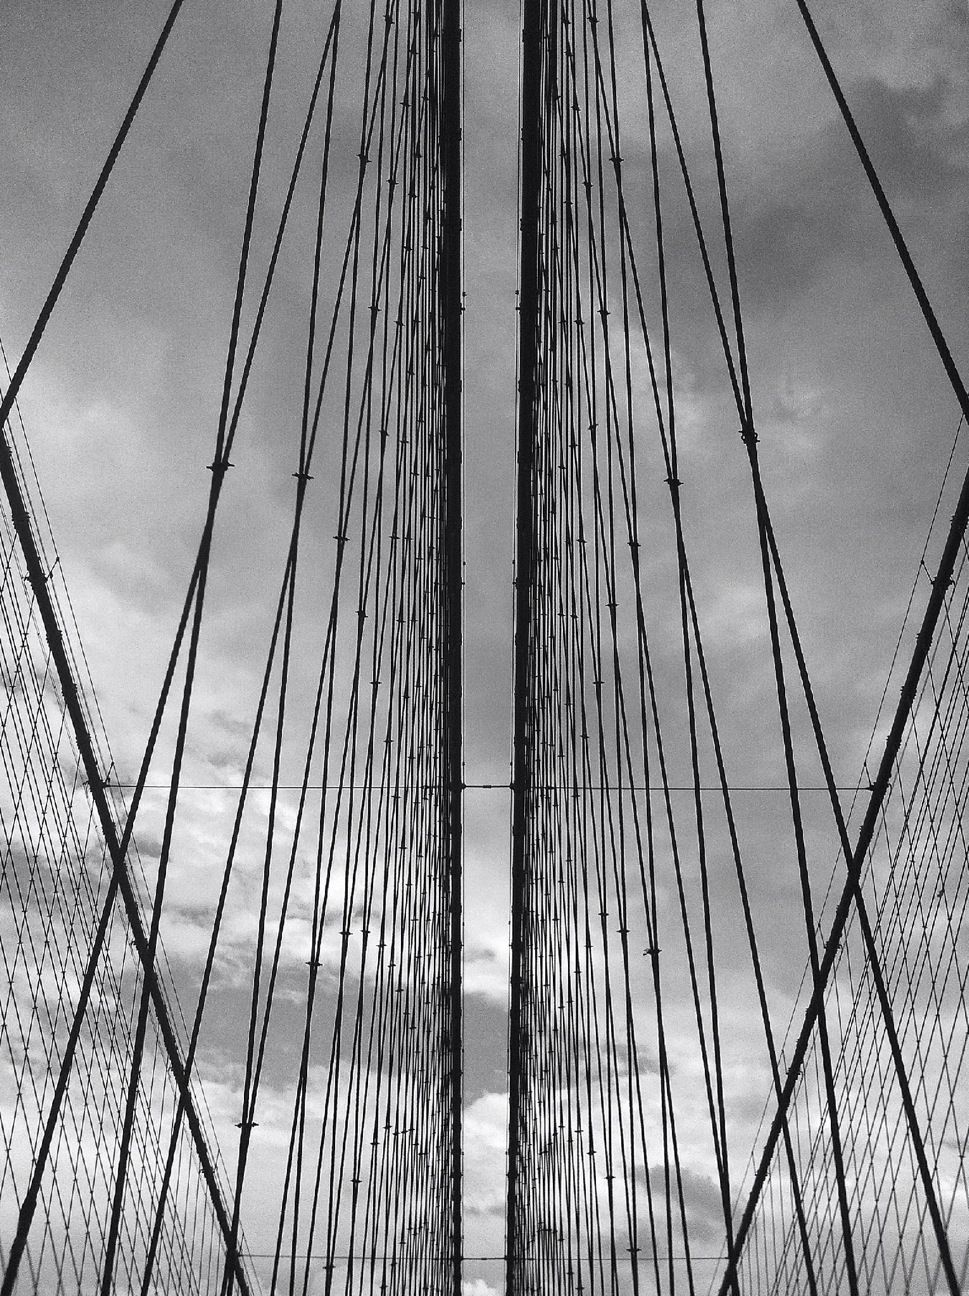 connection, suspension bridge, bridge - man made structure, sky, engineering, transportation, low angle view, outdoors, cable, cloud - sky, no people, day, travel, built structure, architecture, bridge, line, tall ship